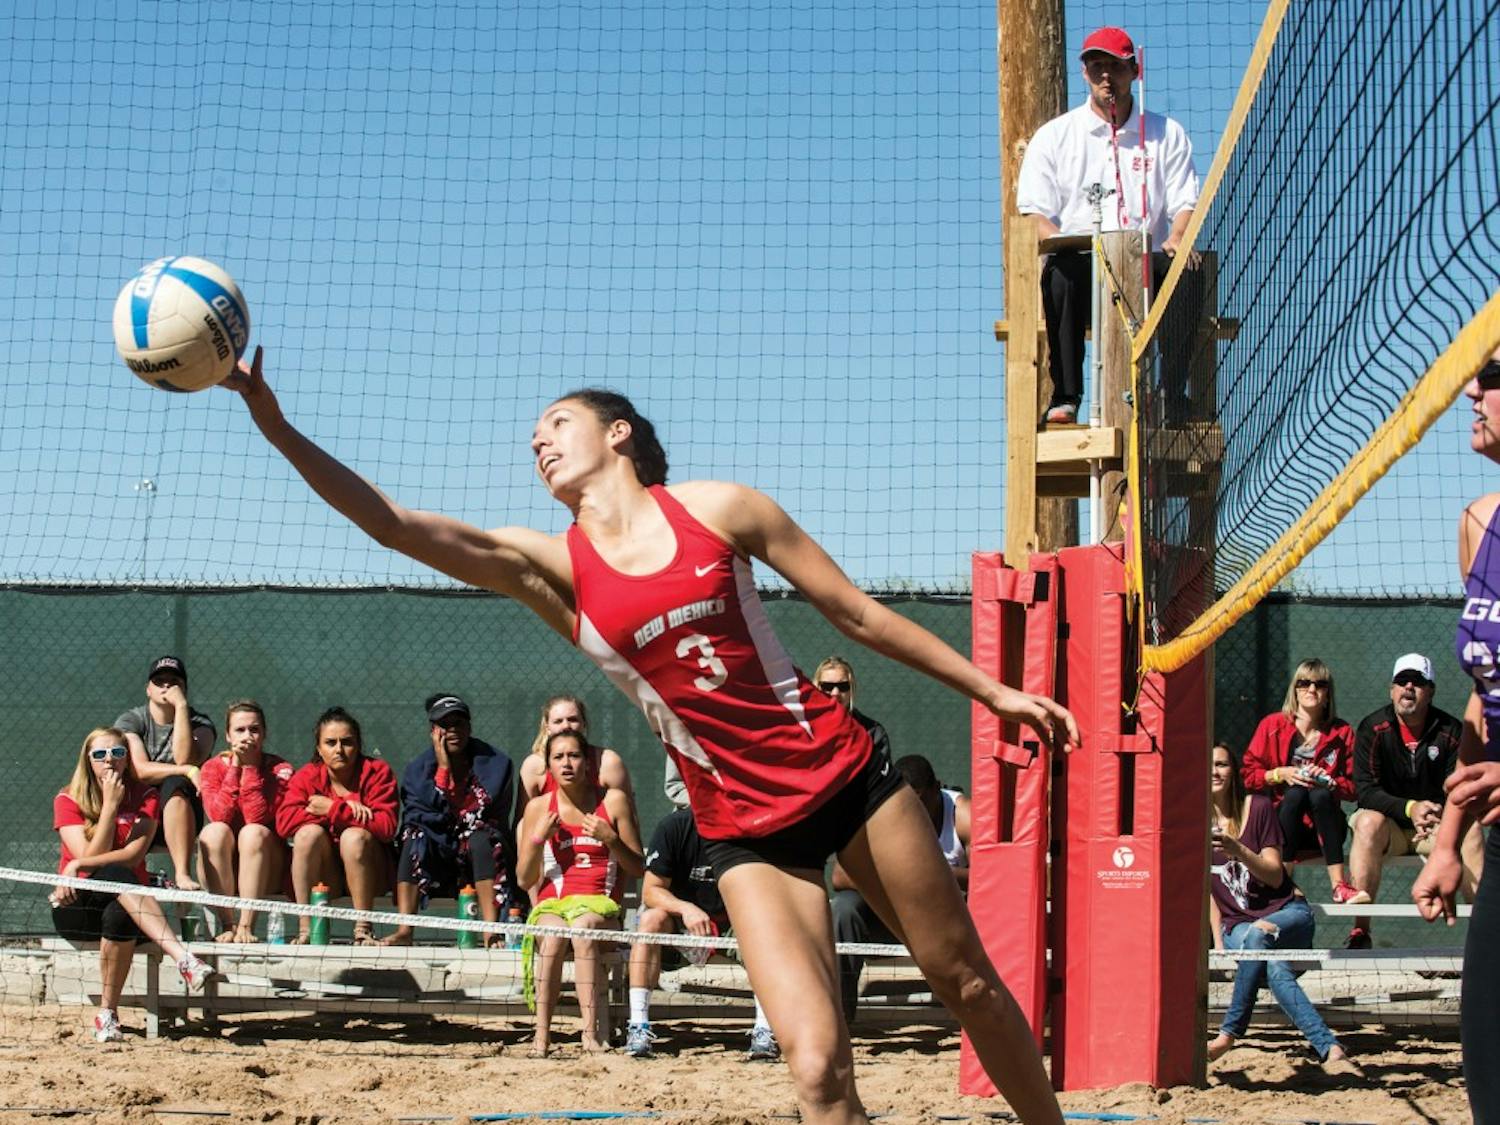 Ashley Kelsey reaches for the ball during the Lobos’ game against Grand Canyon on Mar. 21. The beach volleyball team will hold tryouts Sept. 29 through Oct. 1.